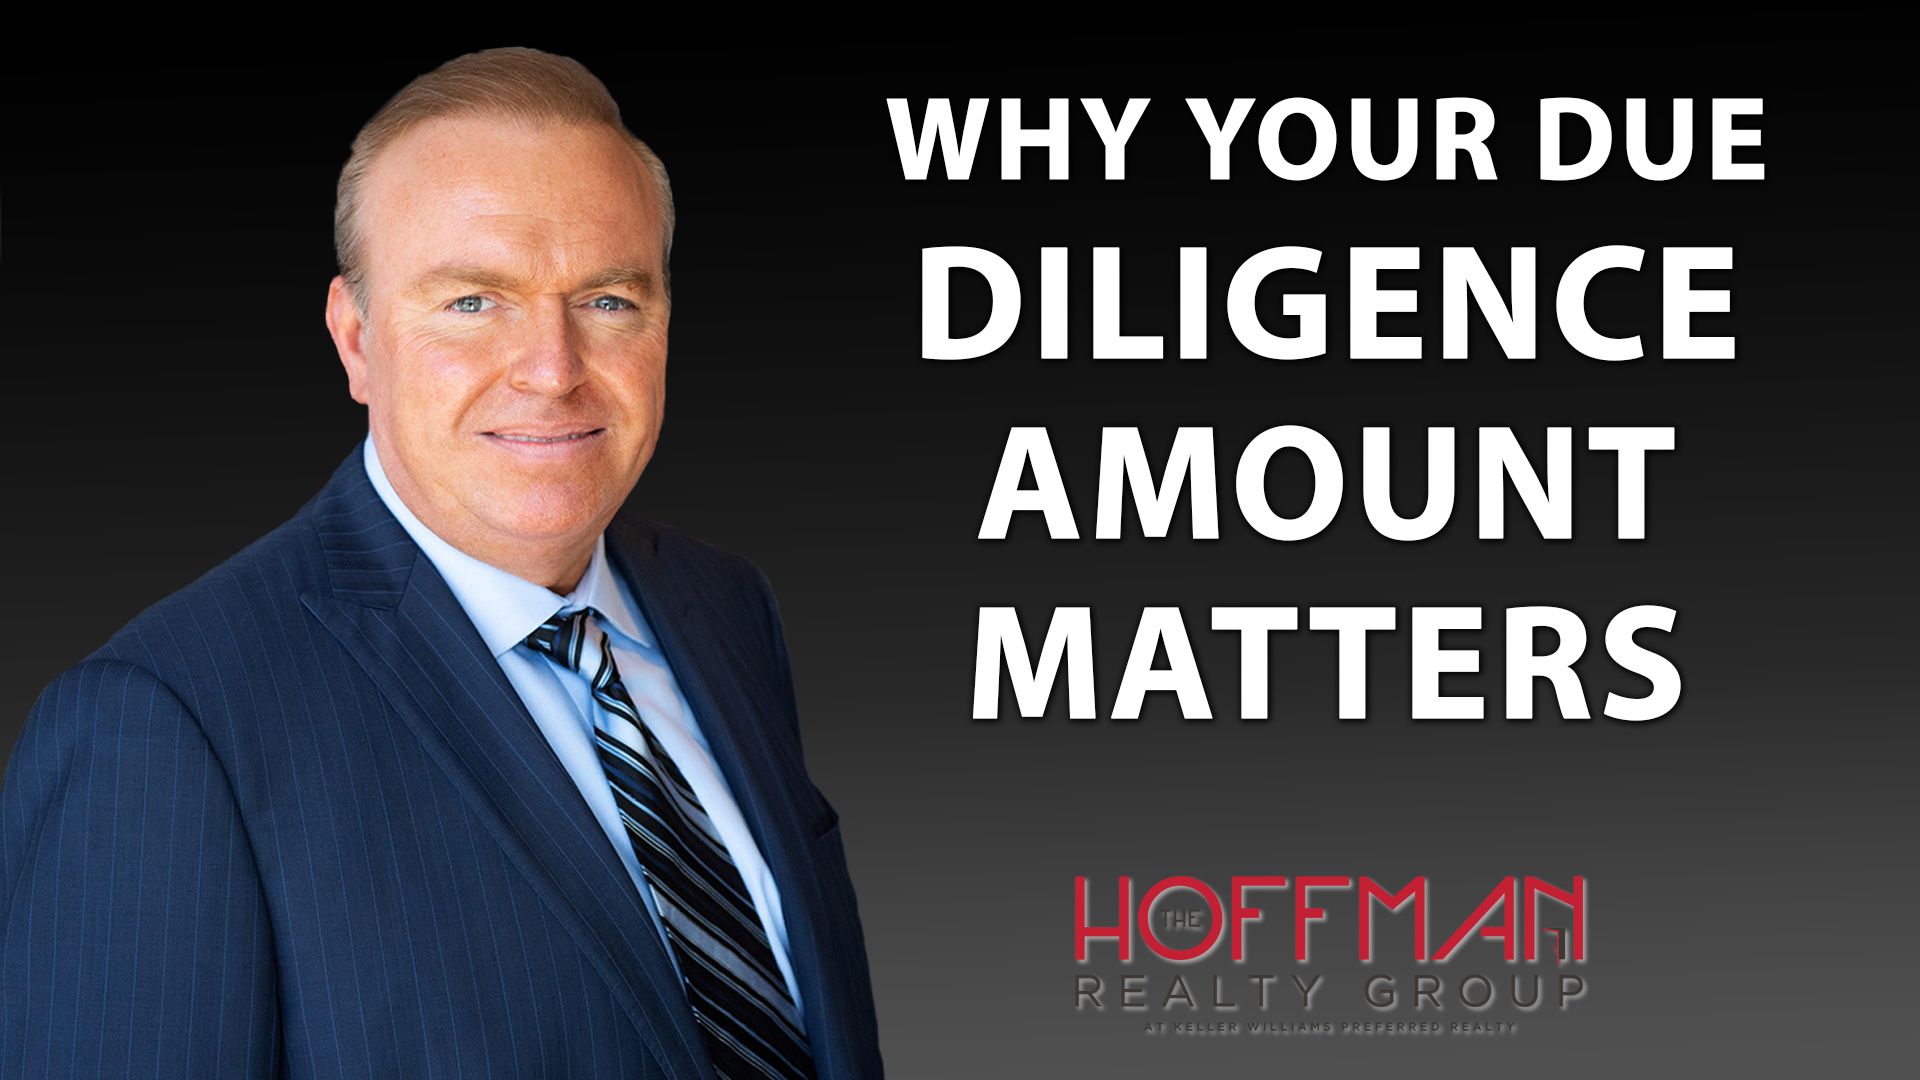 Why Is a Strong Due Diligence Amount So Important?